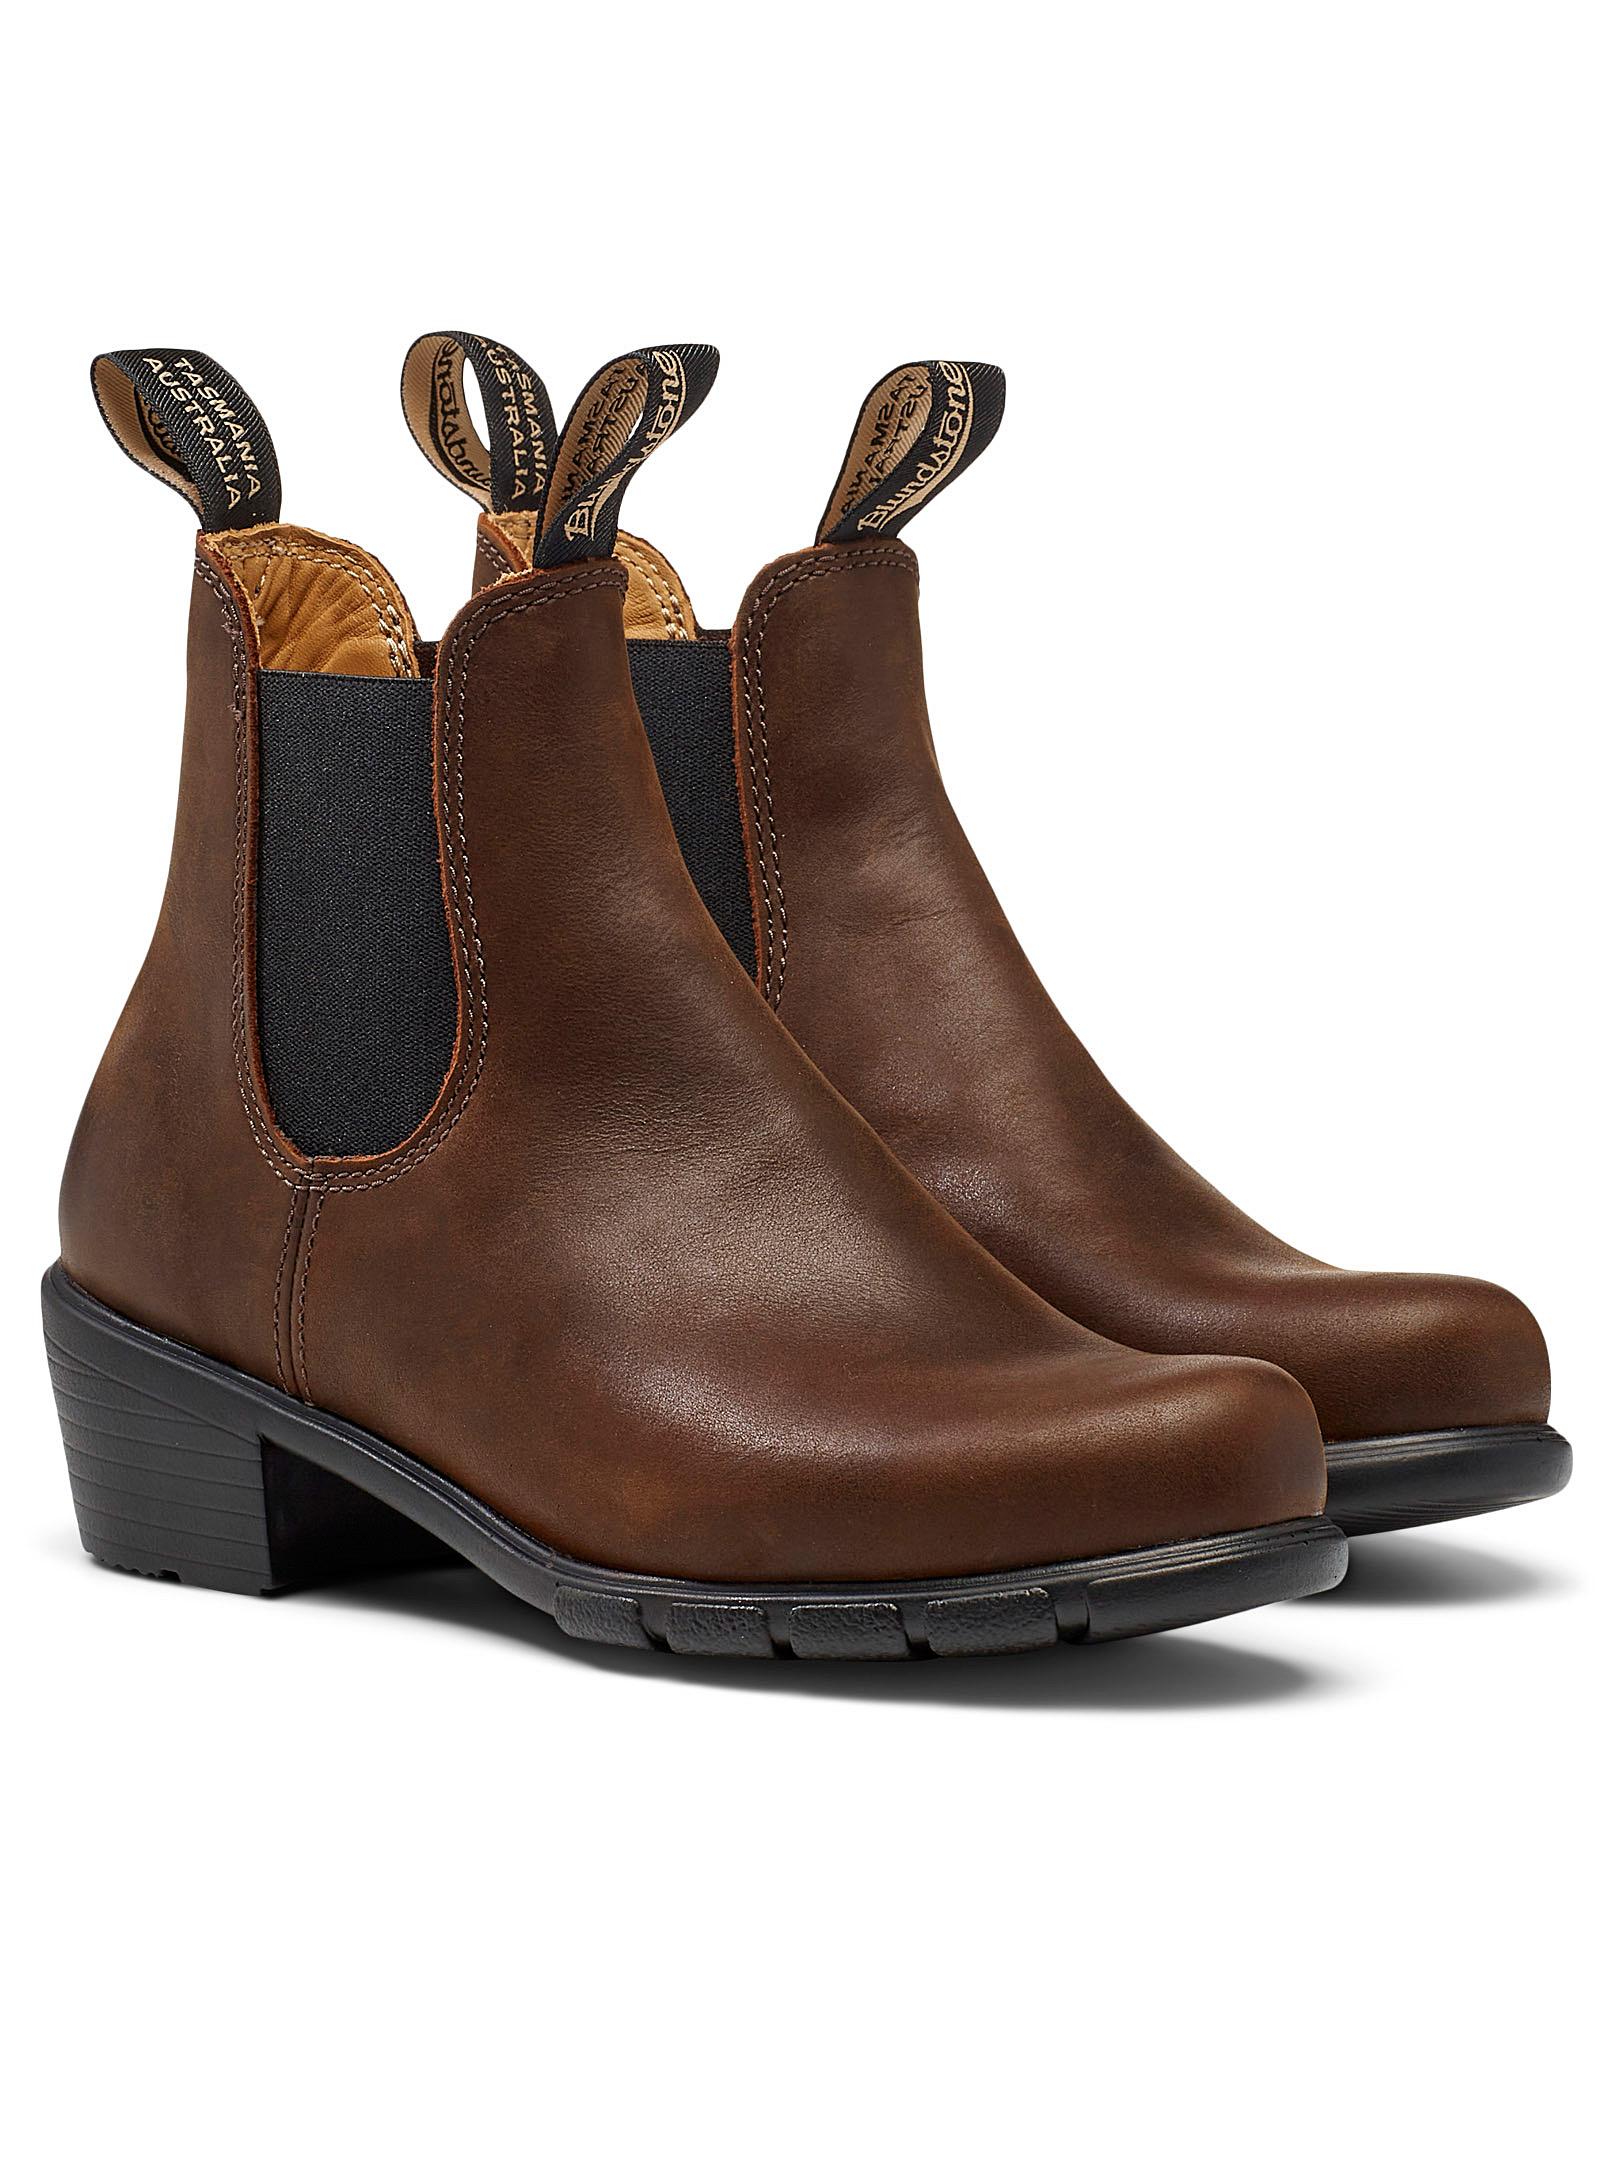 Blundstone Leather 1673 Heeled Chelsea Boots in Brown - Lyst